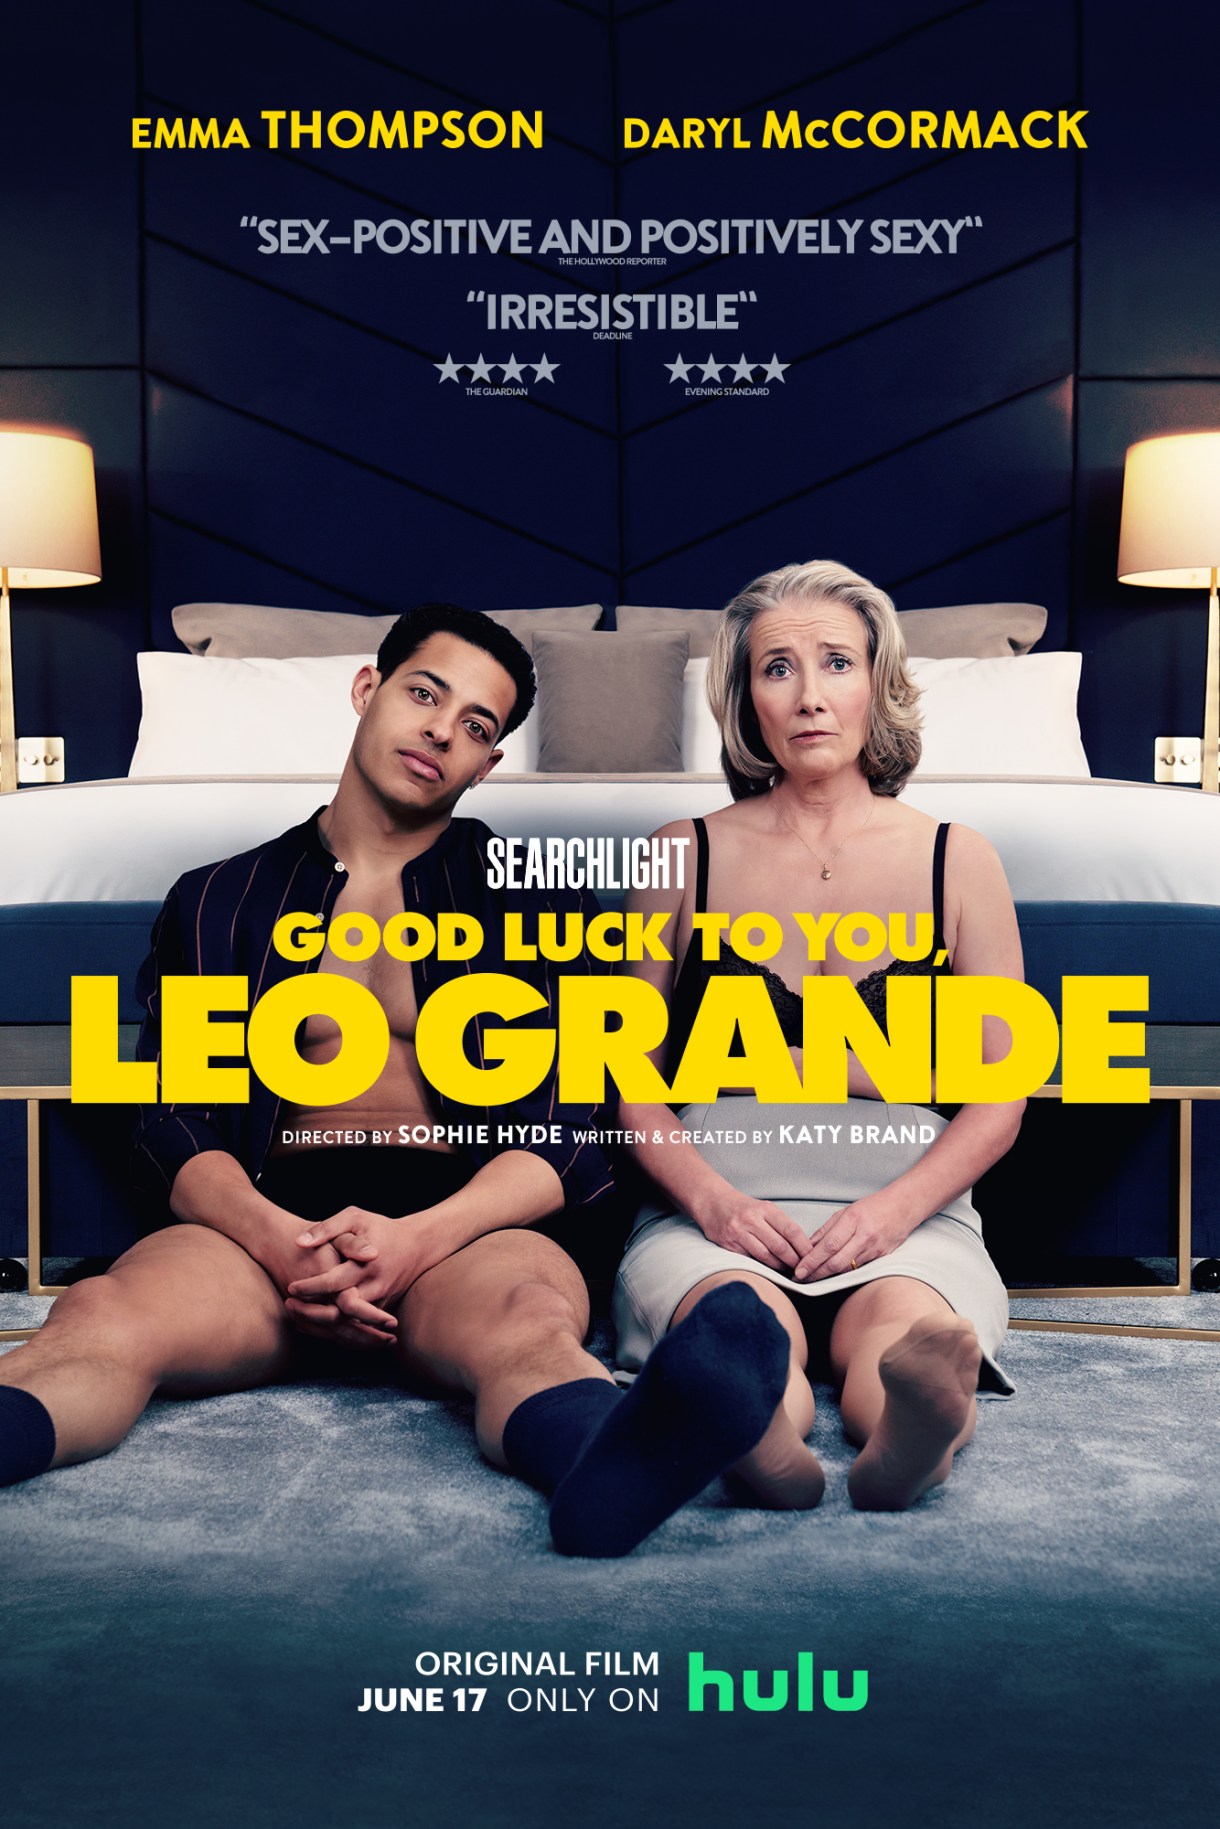 The cover of good luck to you, leo grande, with emma thompson and daryl mccormack in front of a bed in some state of undress looking beleaguered